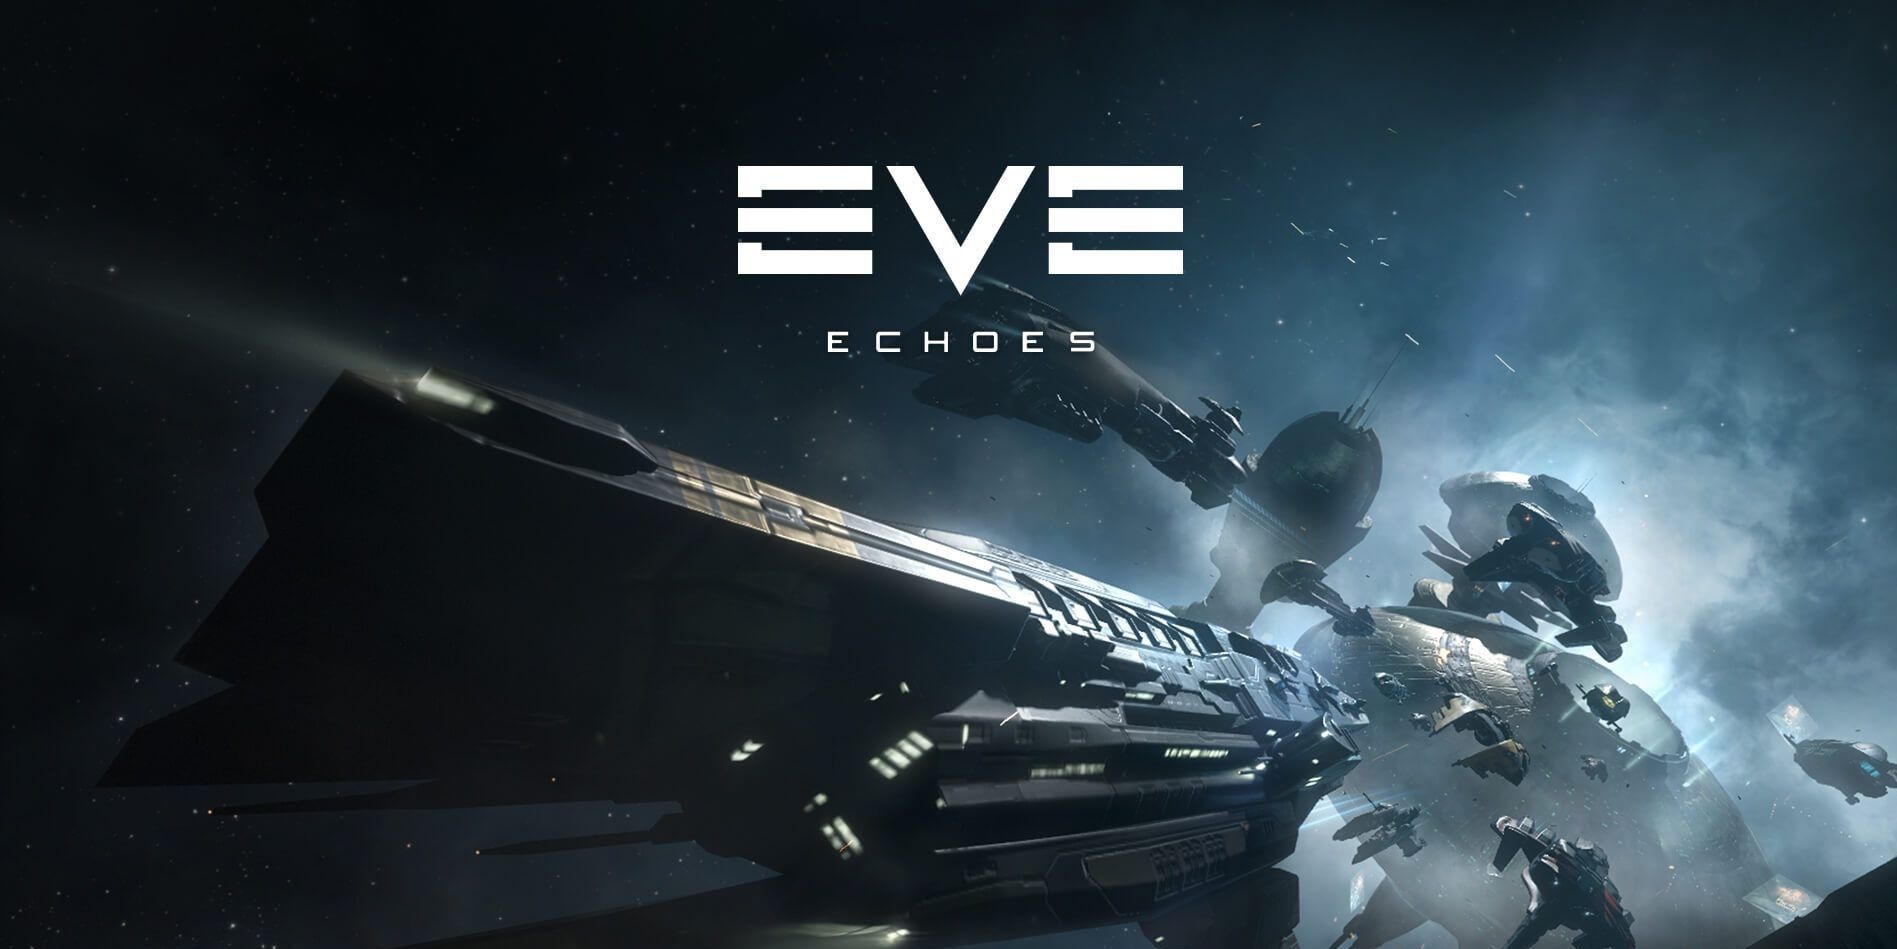 EVE-Echoes Android Sci Fi game for Android and IOS